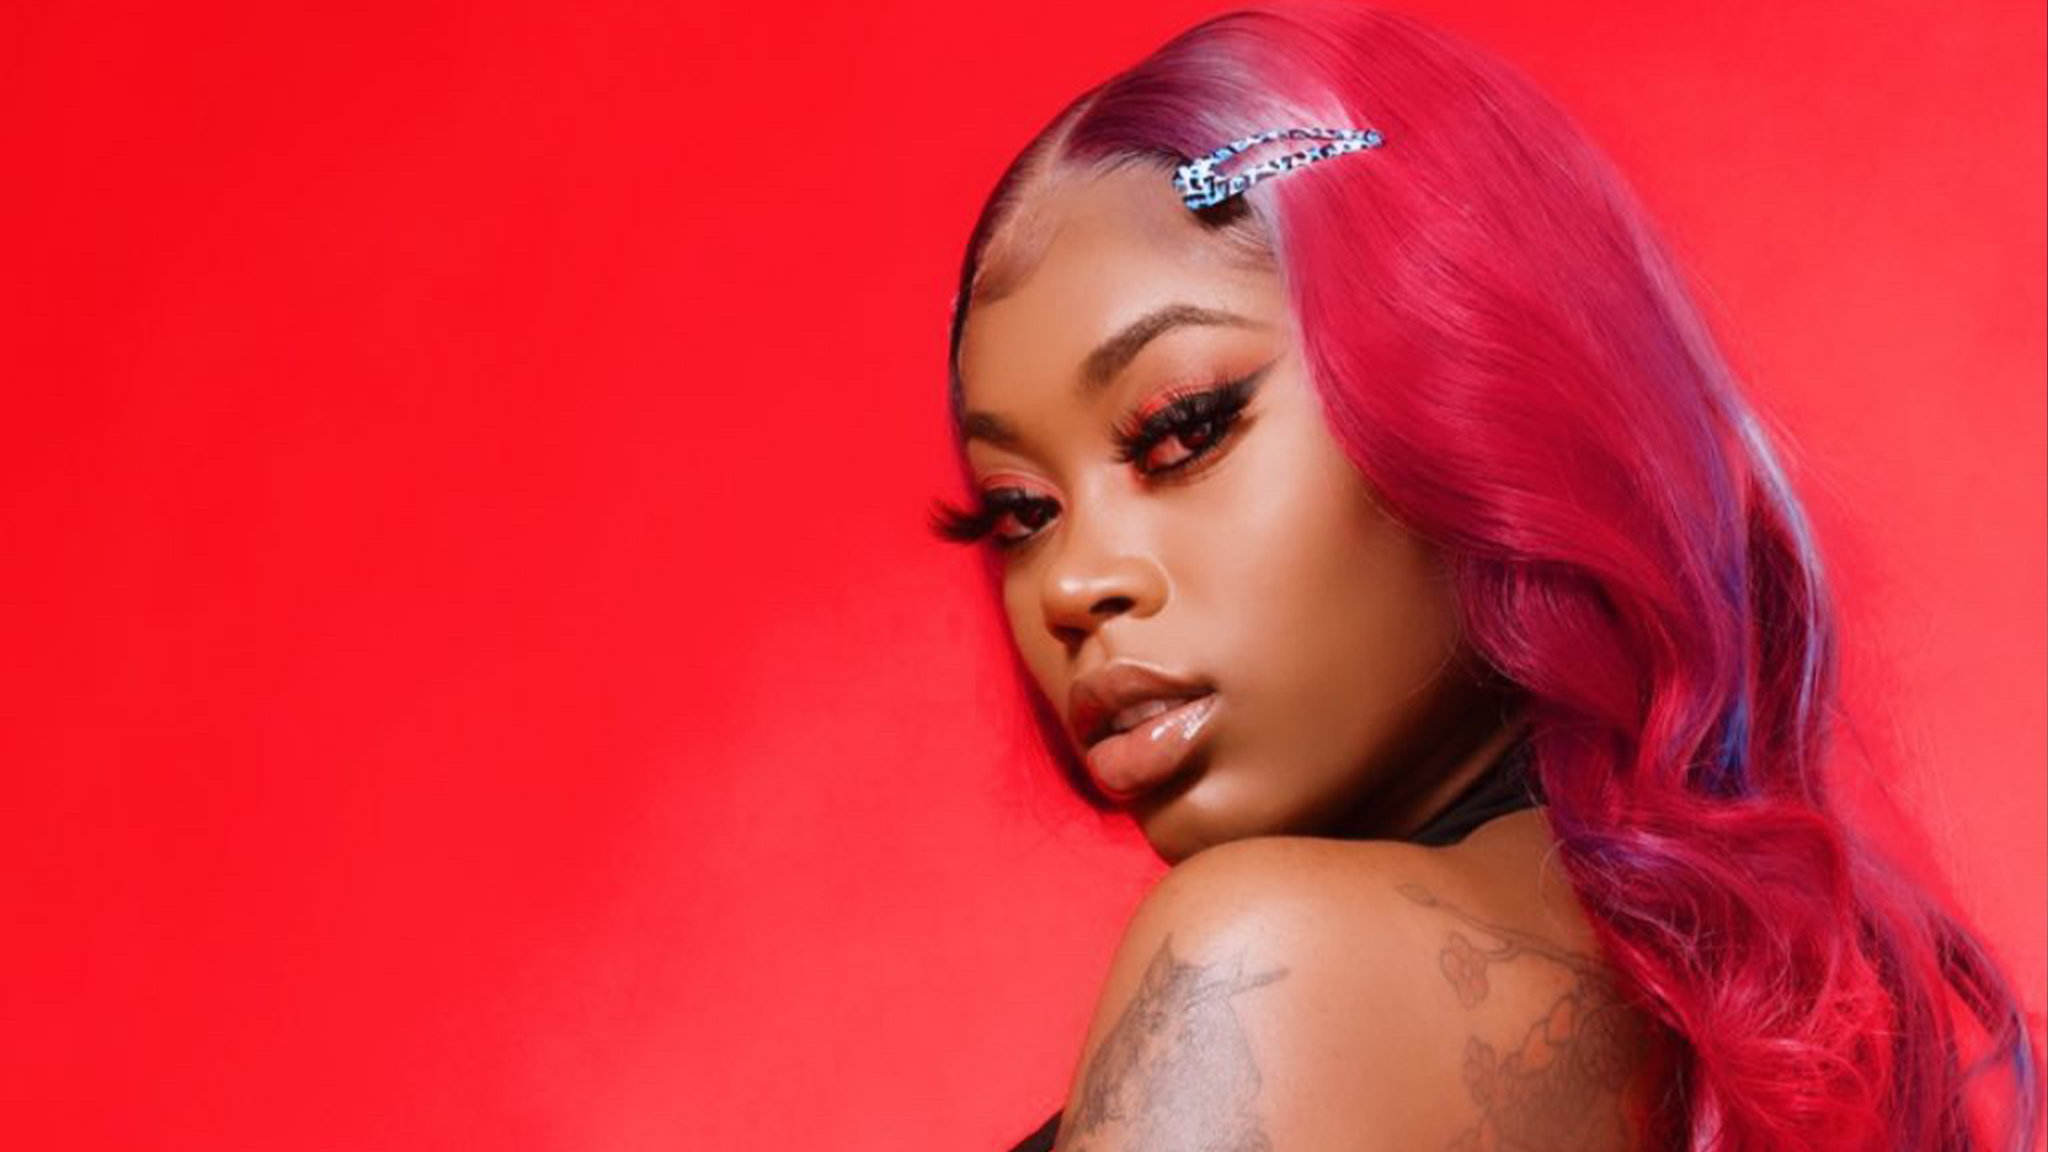 Asian doll pictures